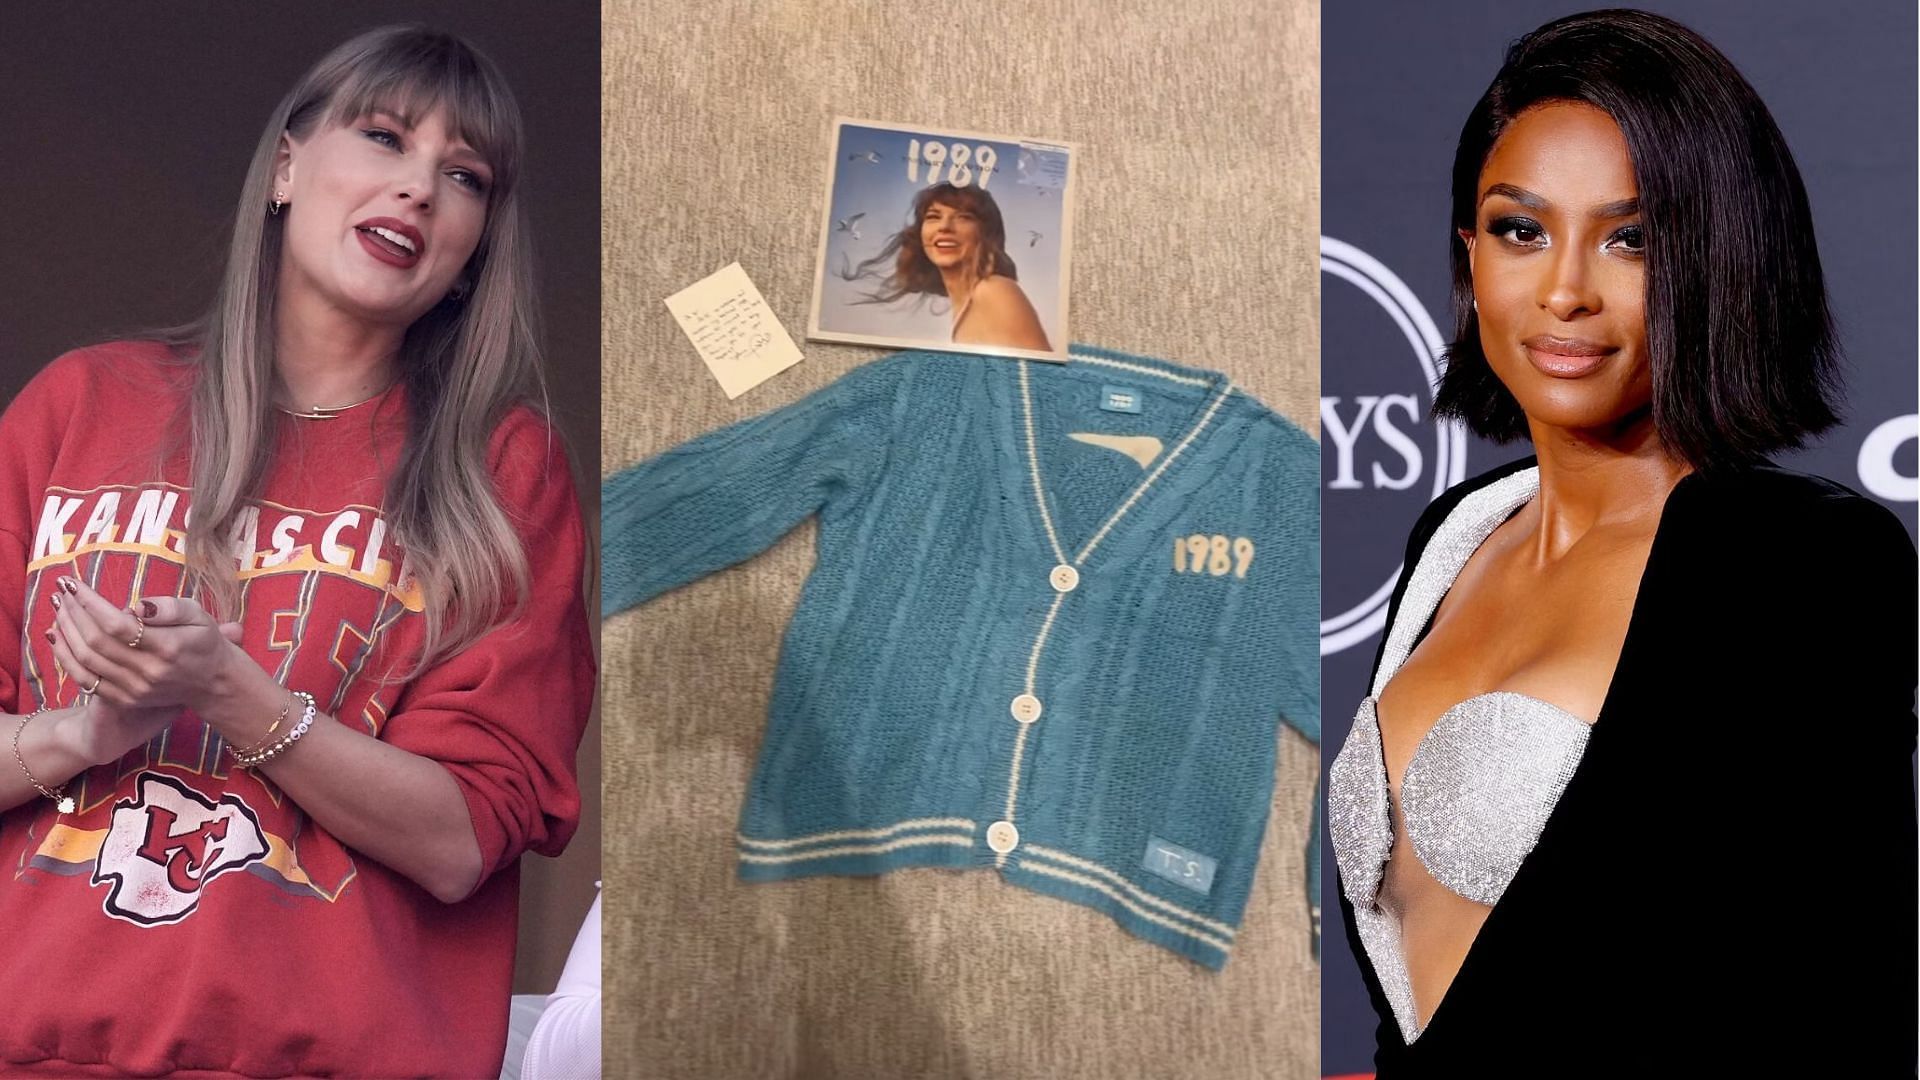 Taylor Swift gave Ciara Wilson a special 1989-themed package. (Image credit: Ciara Wilson